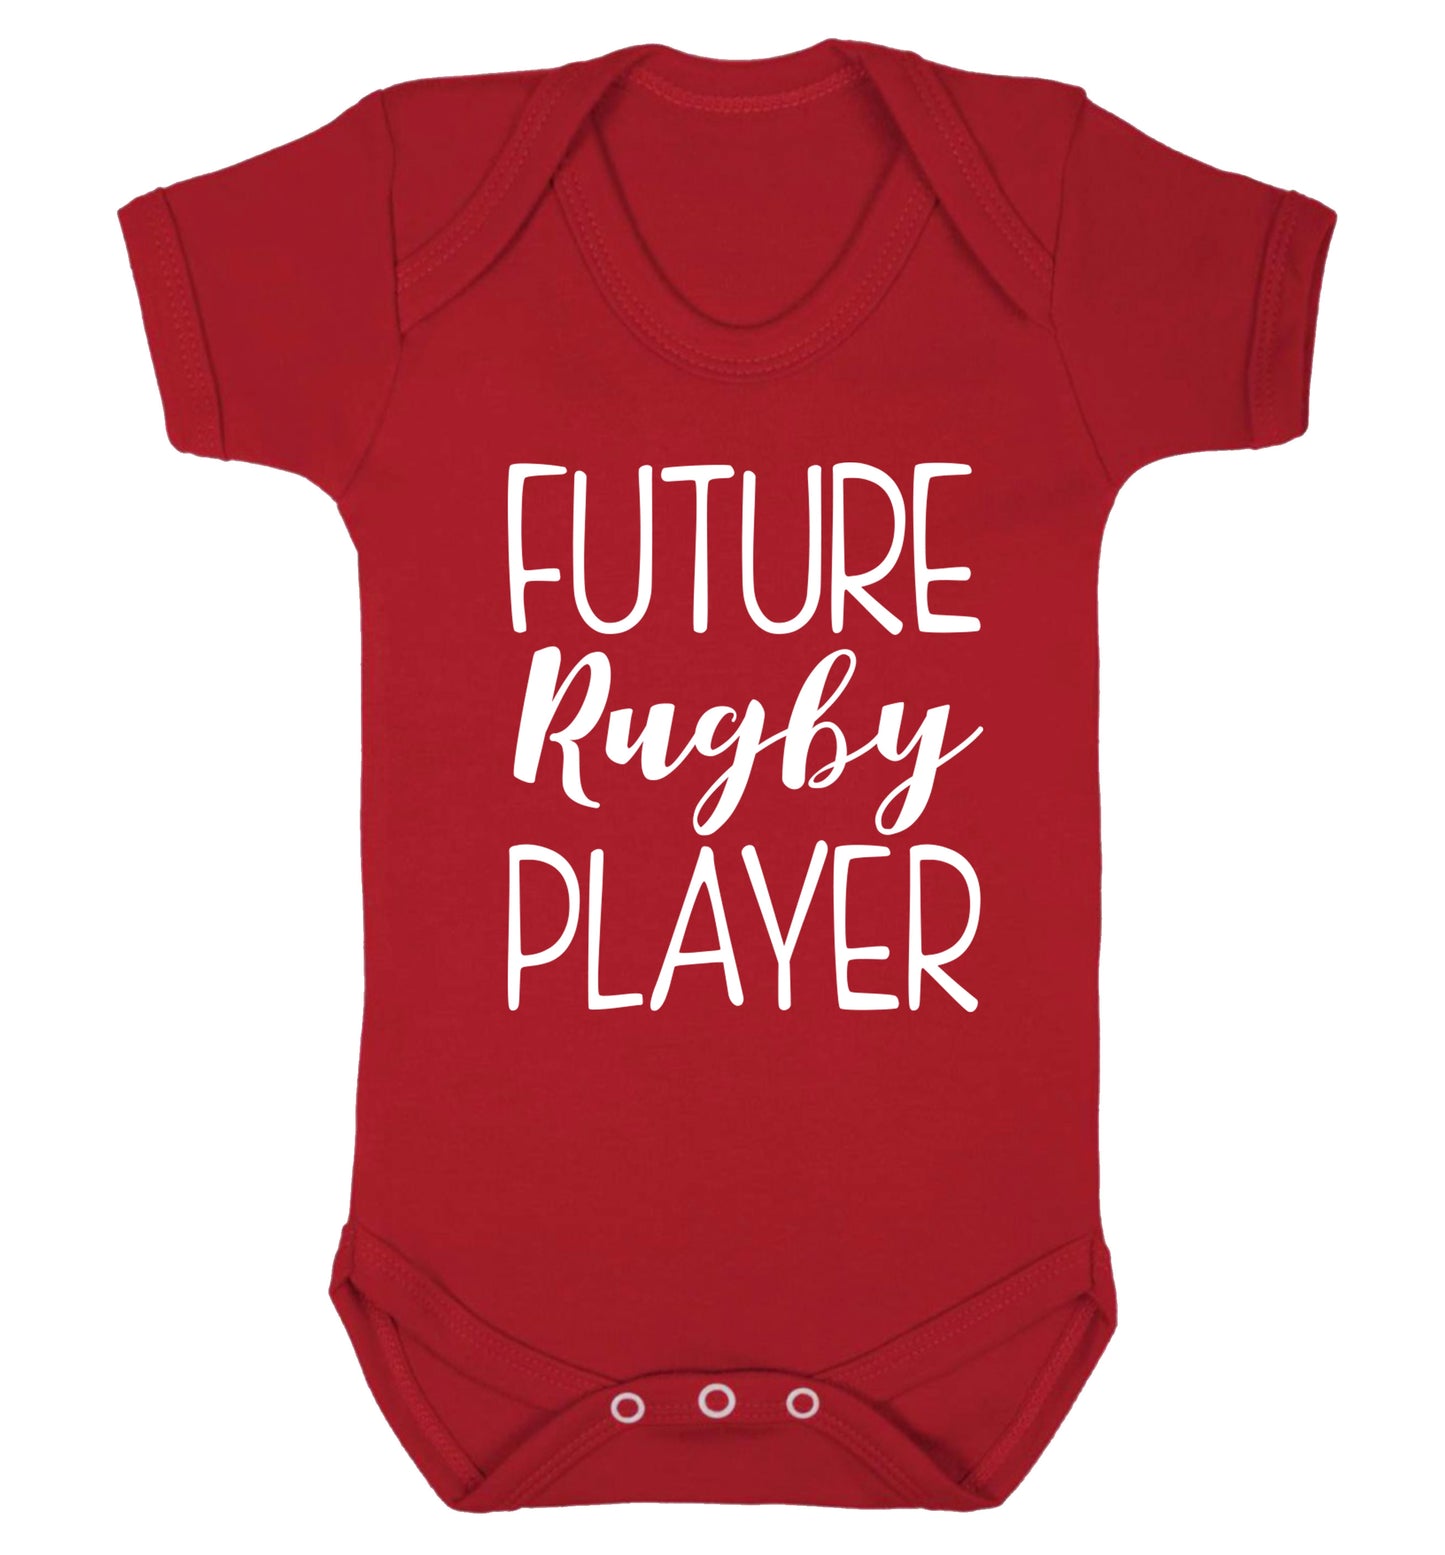 Future rugby player Baby Vest red 18-24 months